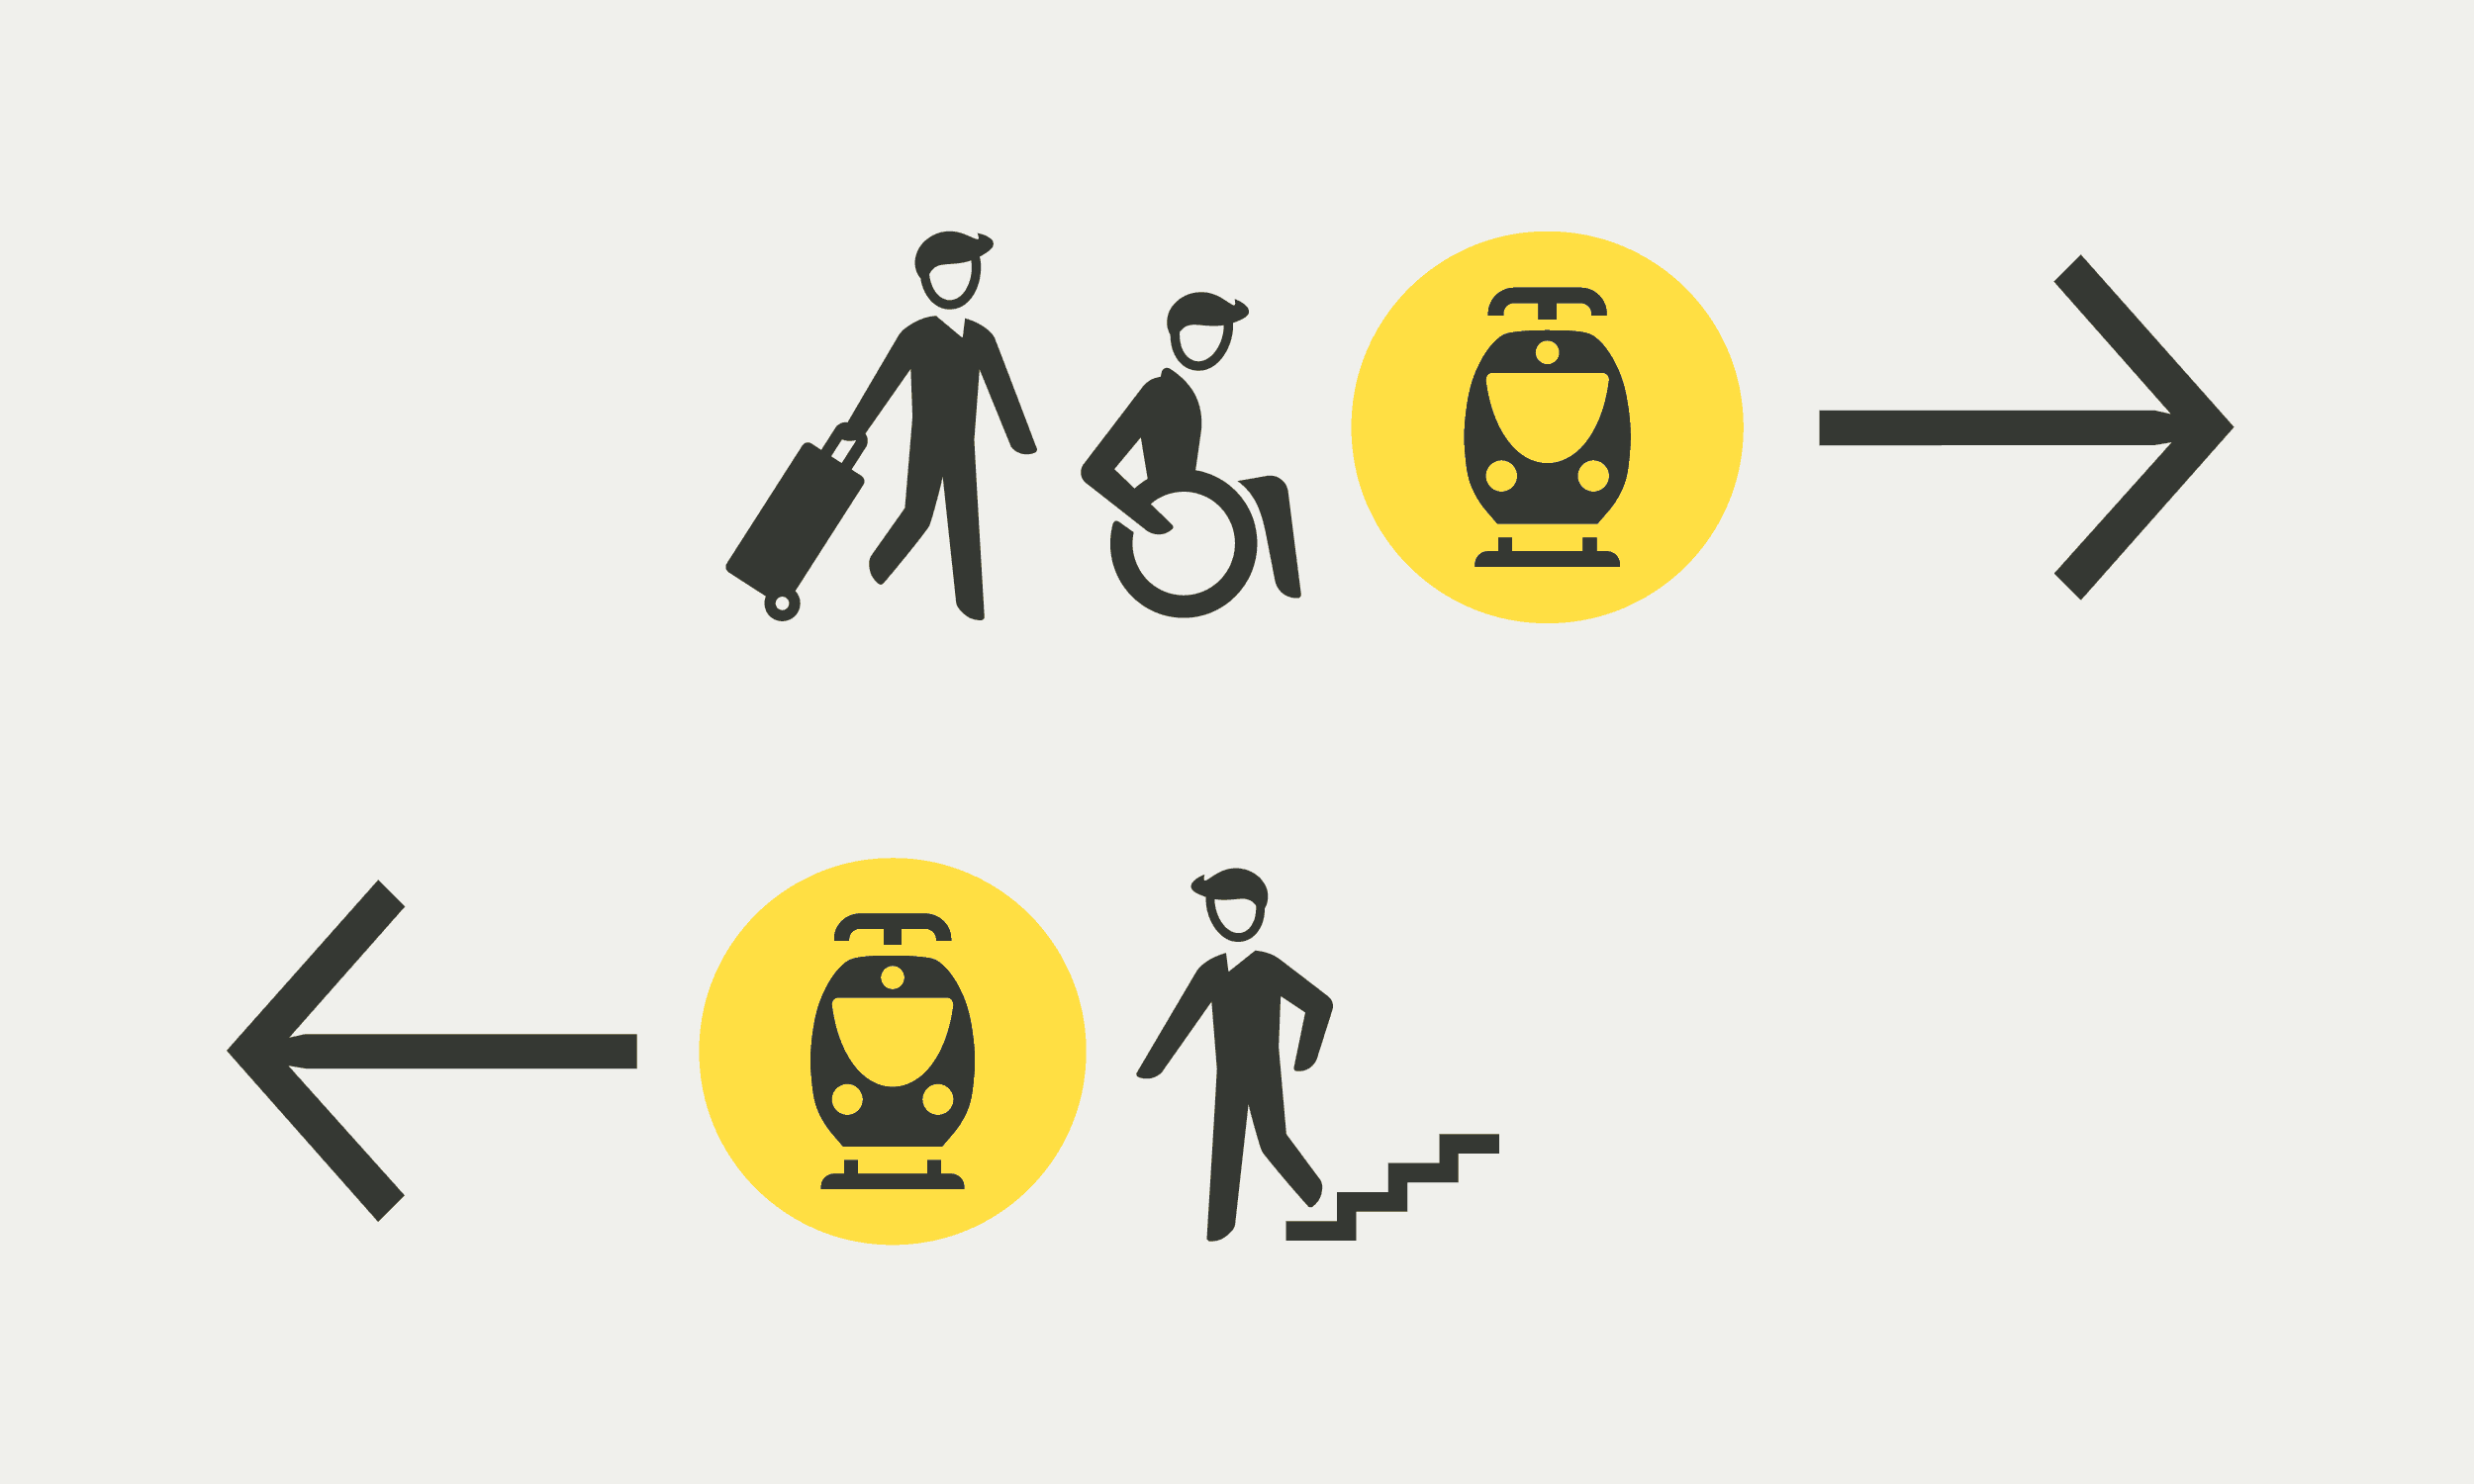 Illustration of pictograms for route orientation to and from the platforms